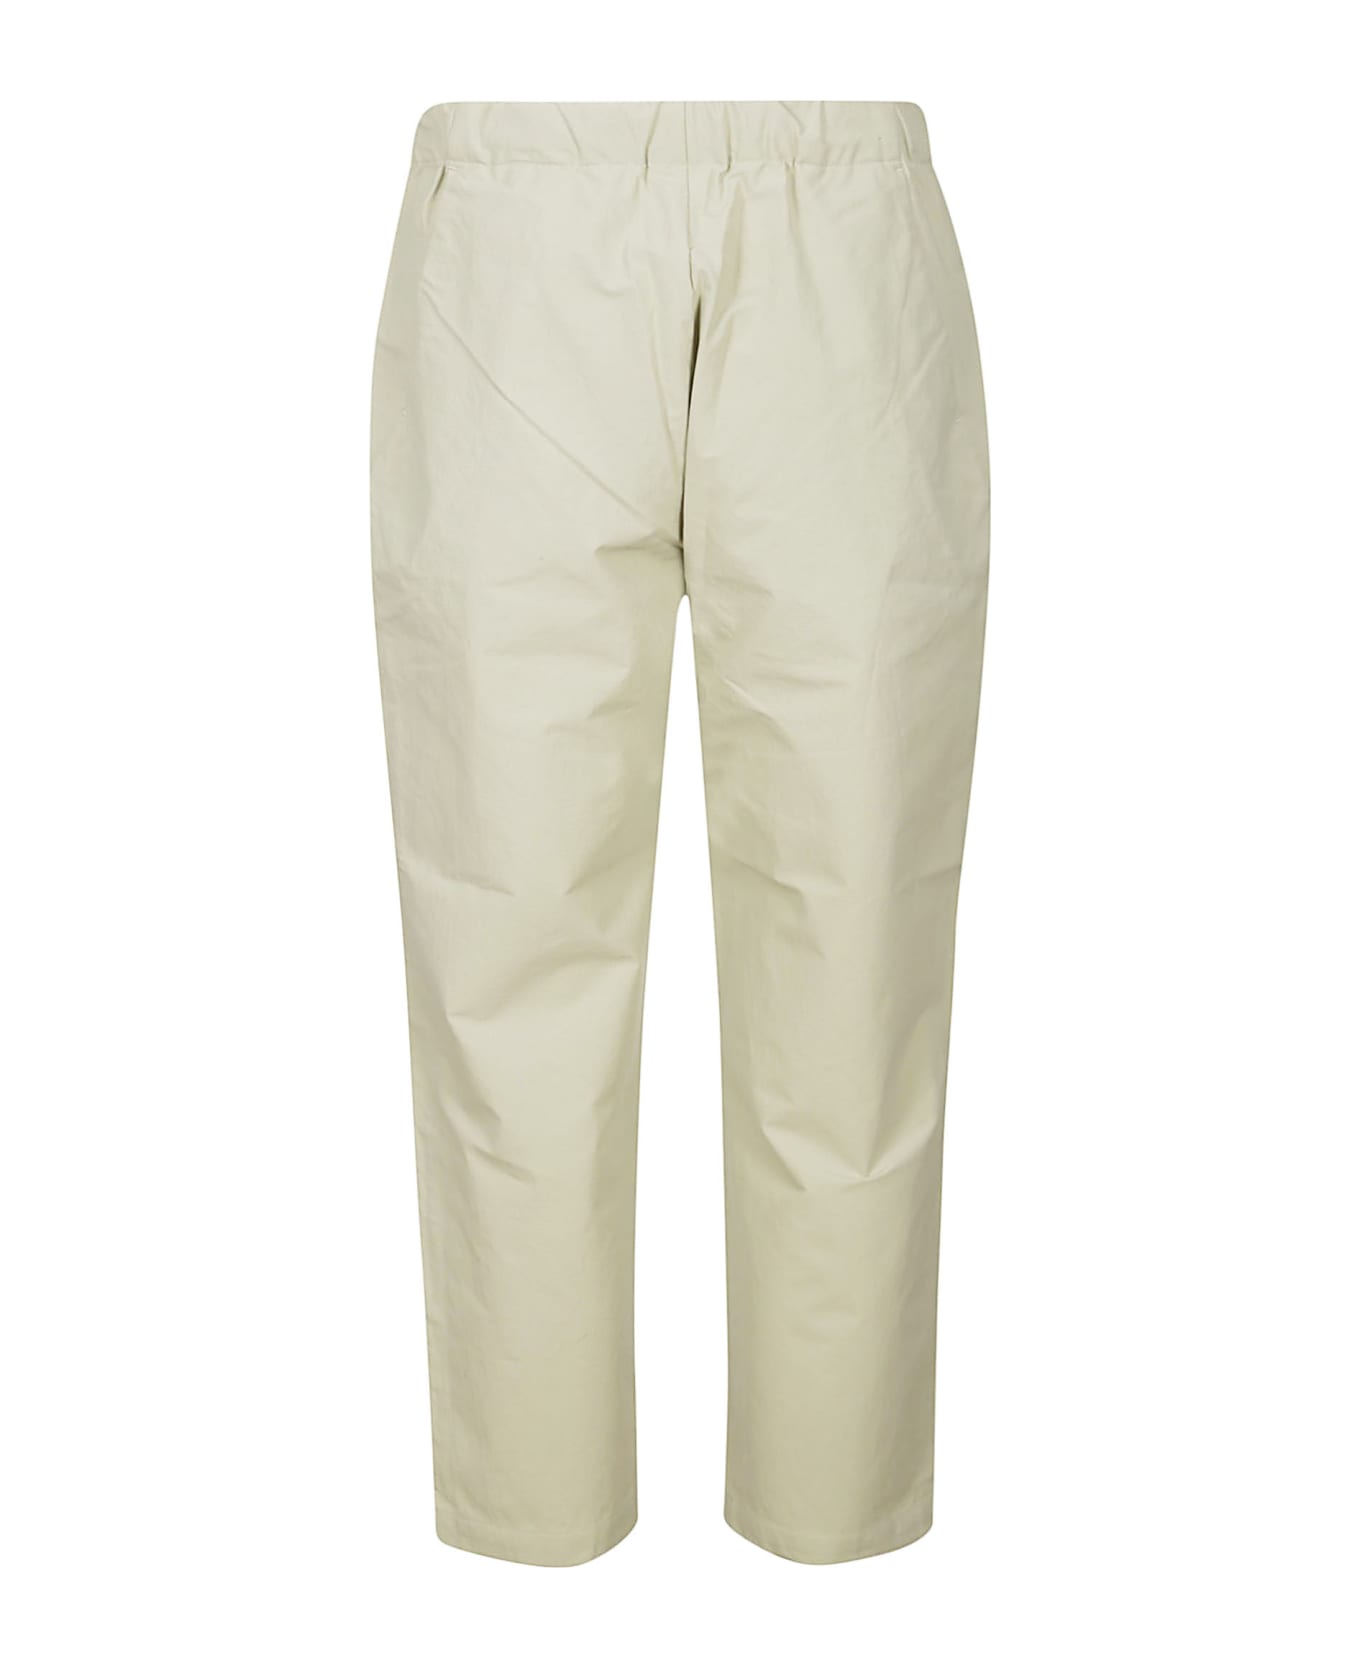 Goldwin One Tuck Tapered Ankle Pants - Lb Light Beige ボトムス